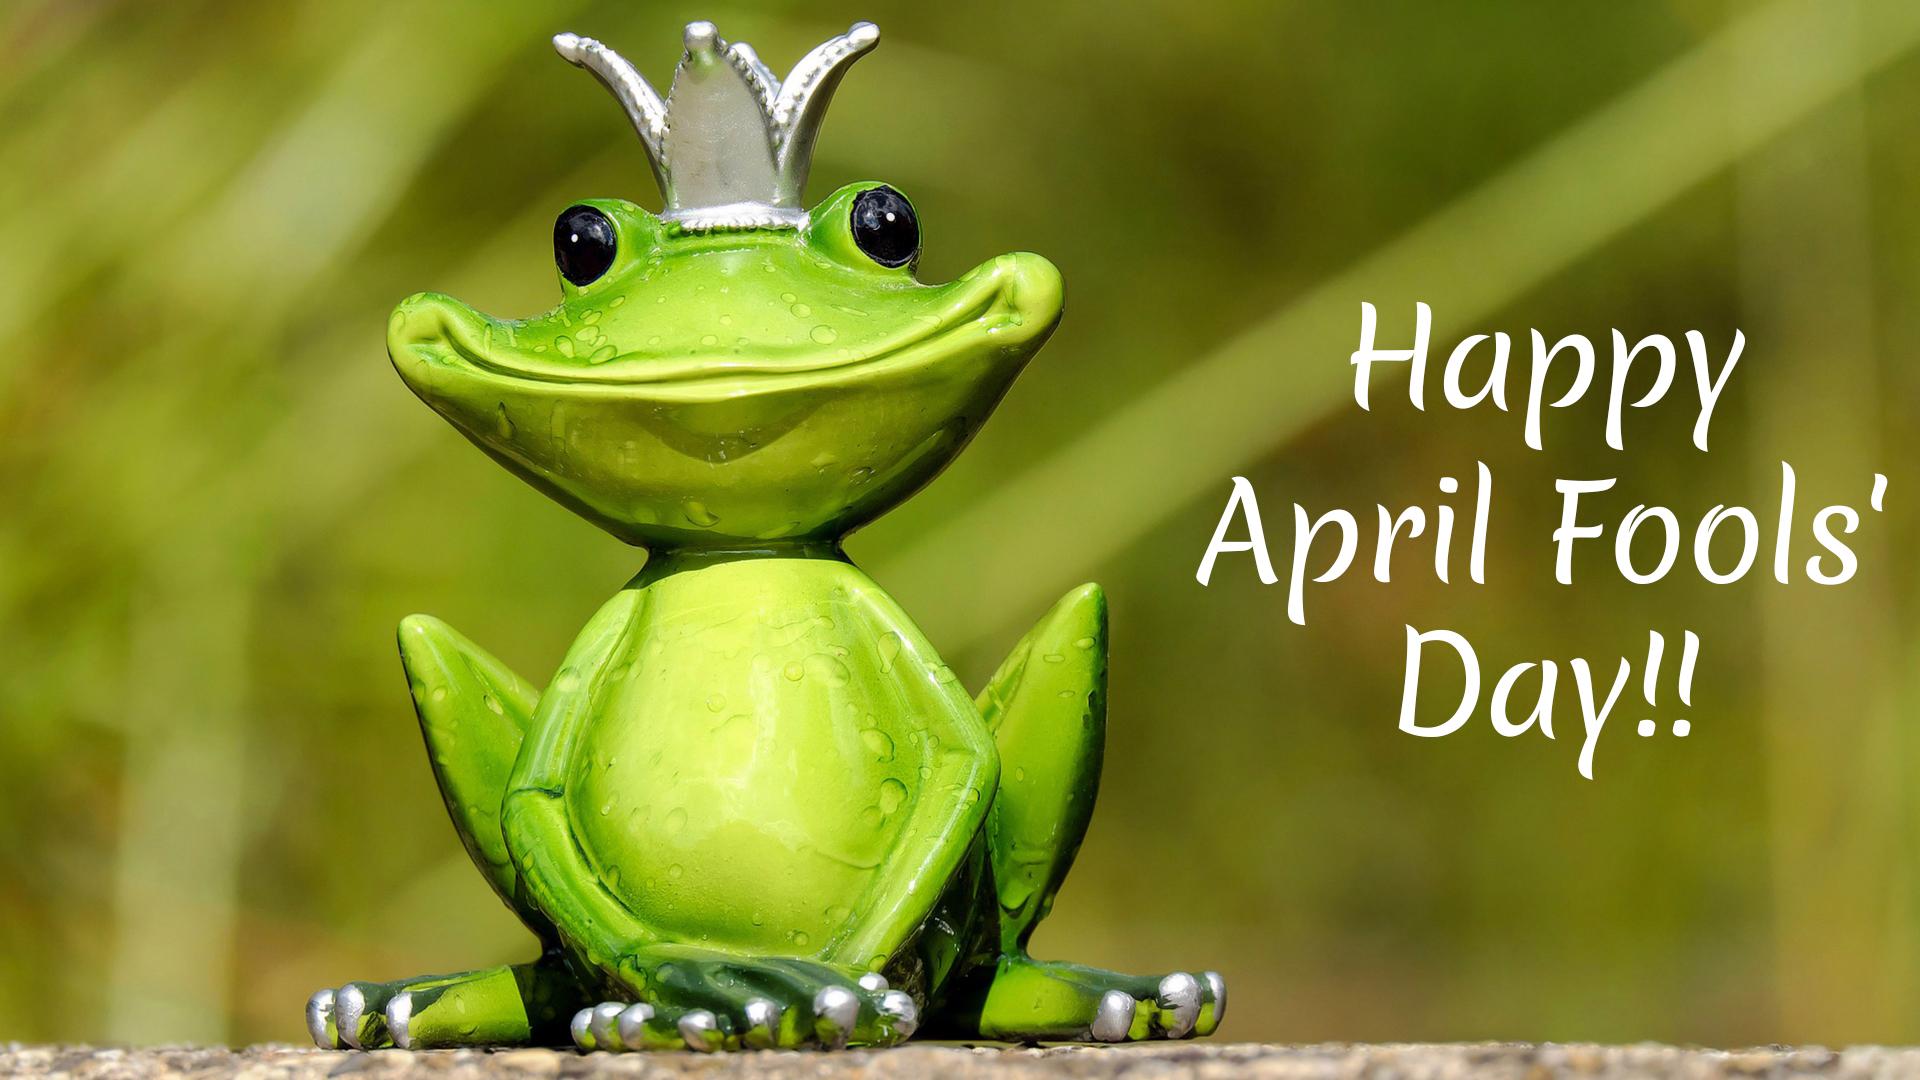 April Fools’ Day Images & Funny Jokes Download for Free Online Best